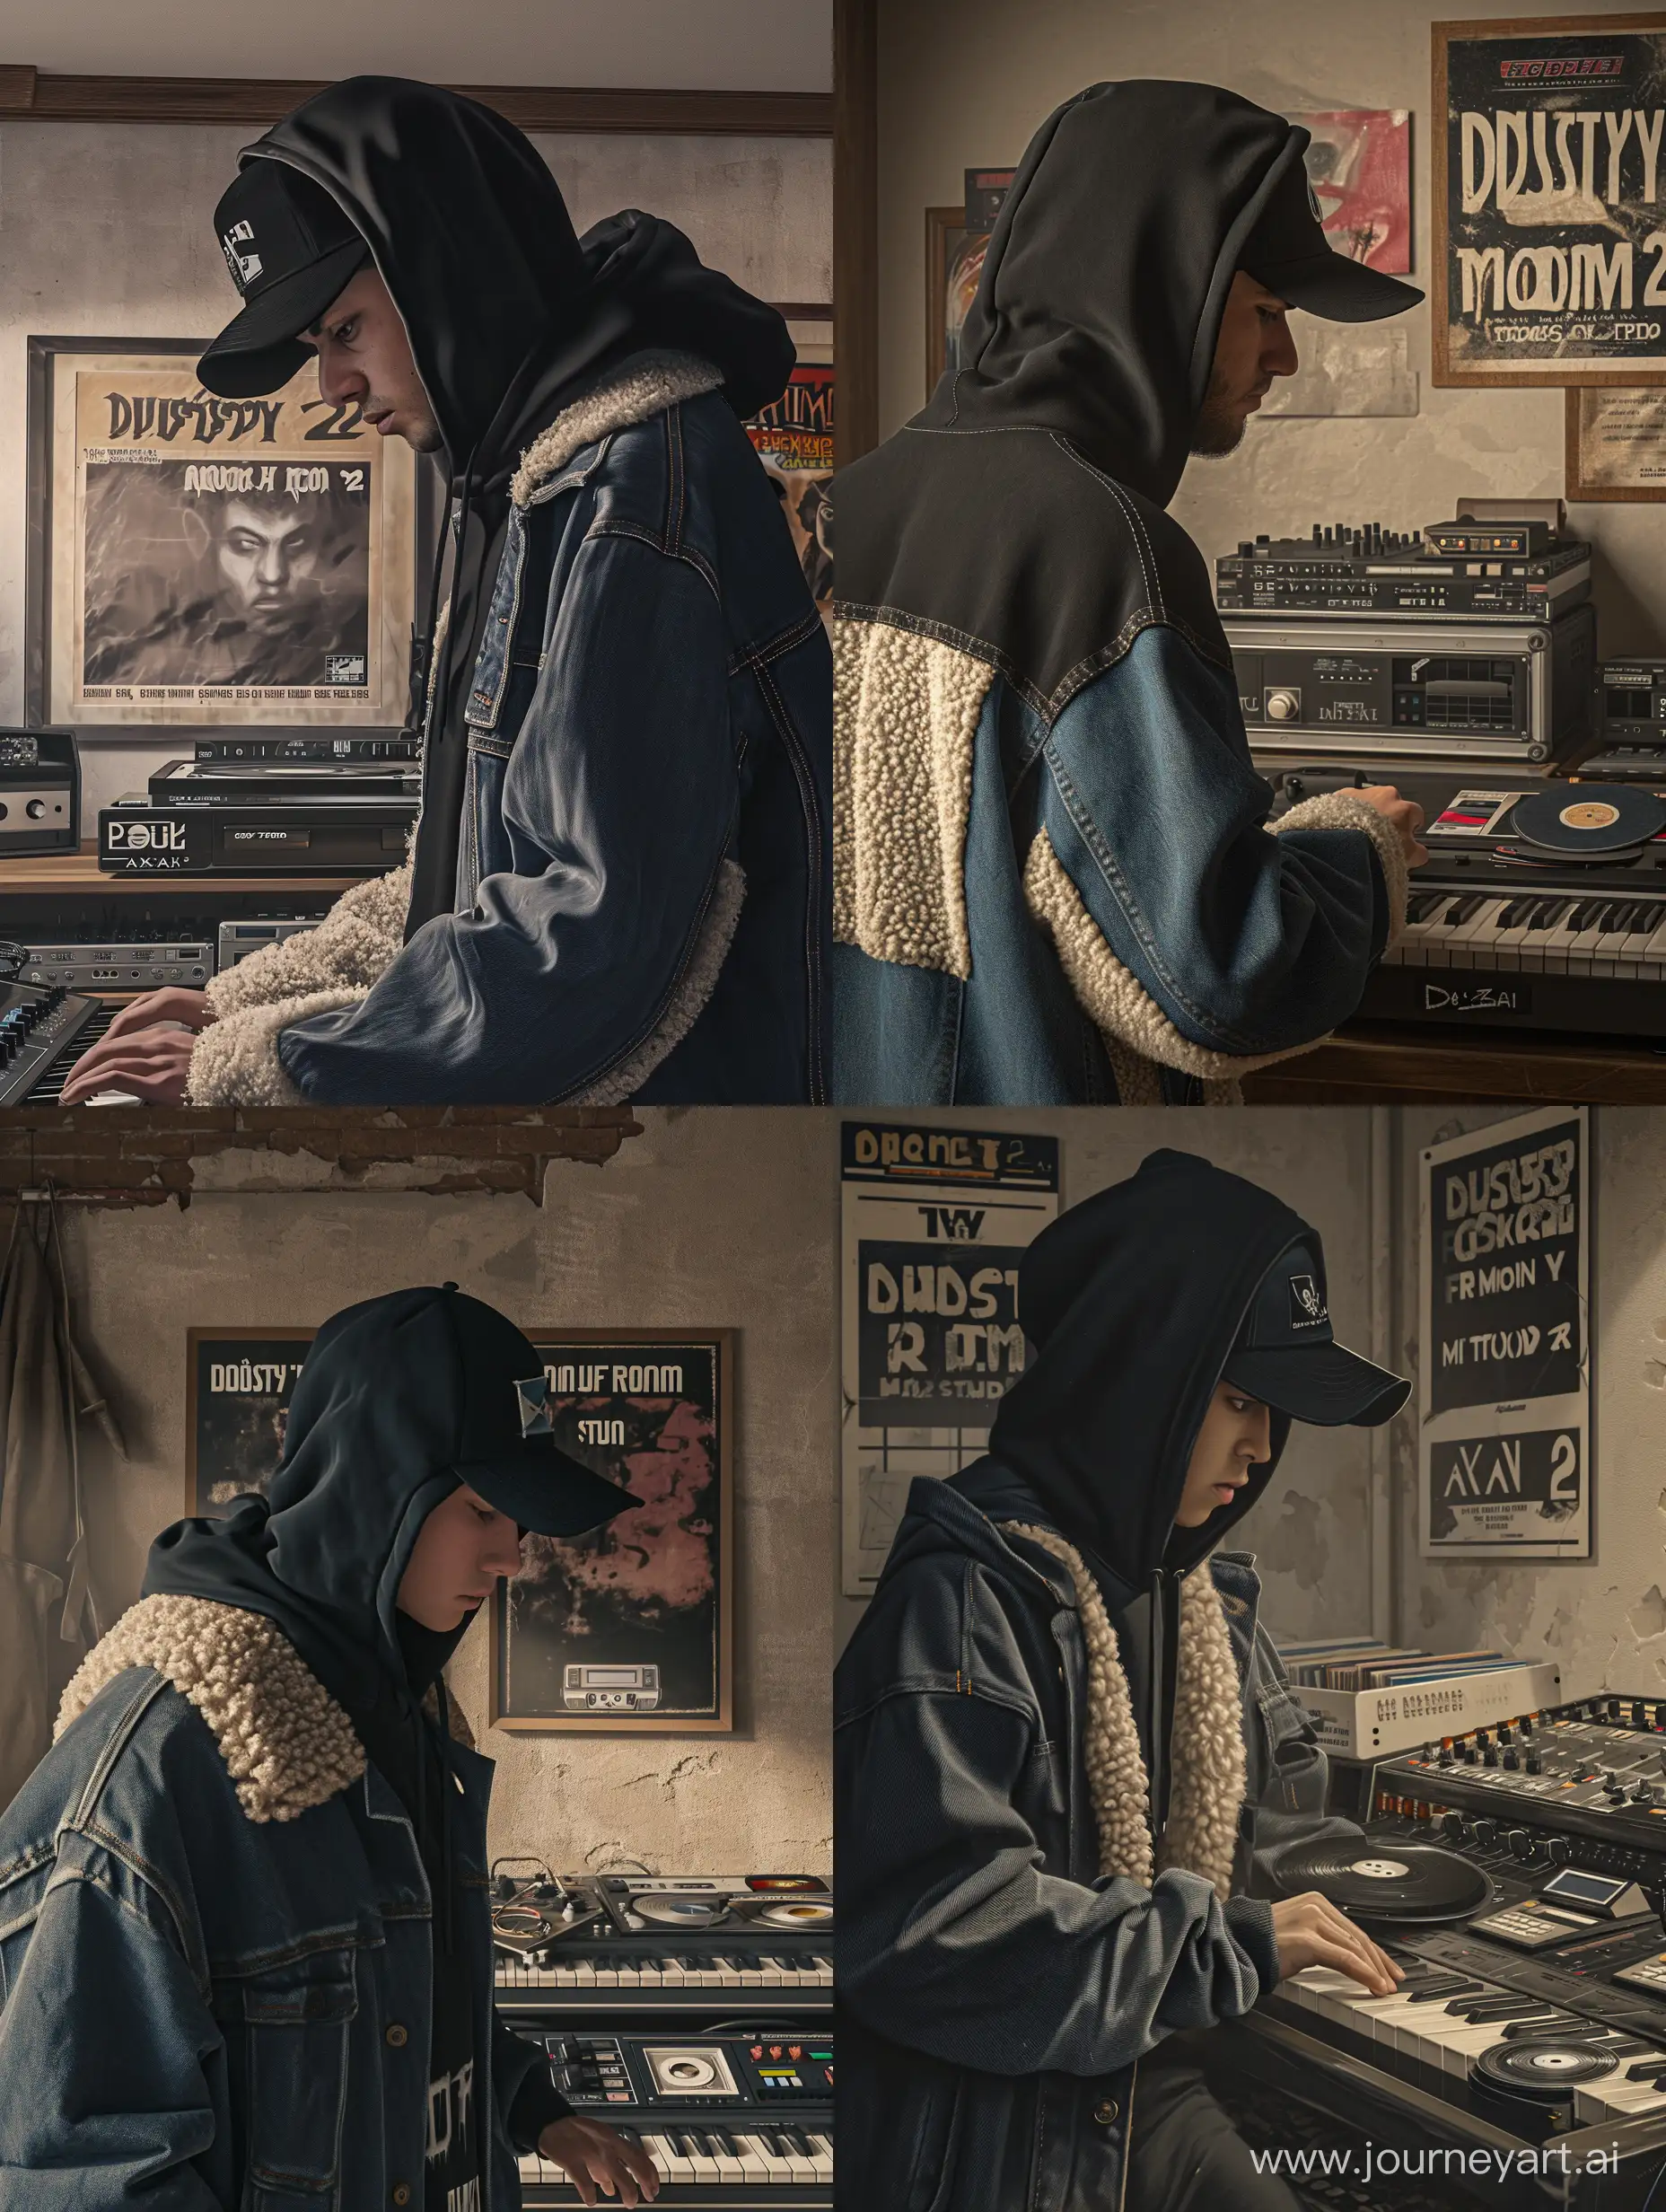 "Frame by frame. Style: Hyperrealism. Character: A man in a black hoodie (hood not worn on the head), black snapback cap, denim 'trucker' style jacket lined with sheep's wool. Environment: A dusty music studio in a basement, featuring akai music equipment and vinyl records and old horror posters titled 'DUSTY ROOM 2' on the wall. Action: The character is either creating music or listening to a recording on a cassette. Lighting and colors: Natural lighting suggesting cloudy skies, with a focus on earthy and neutral denim shades. Perspective and composition: Adhering to the golden ratio, focusing on the character and their interaction with the music equipment. Negative Prompt: No neon colors, other characters, unrelated objects, bright colors, elements of fantasy or surrealism. Additional information: To be used as a hip-hop album cover, capturing an atmosphere of concentration and passion for music. Tags: #hiphop, #musicproduction, #akai, #studio, #mixtape. Notes: Emphasis on the details of the clothing and authenticity of the music equipment.